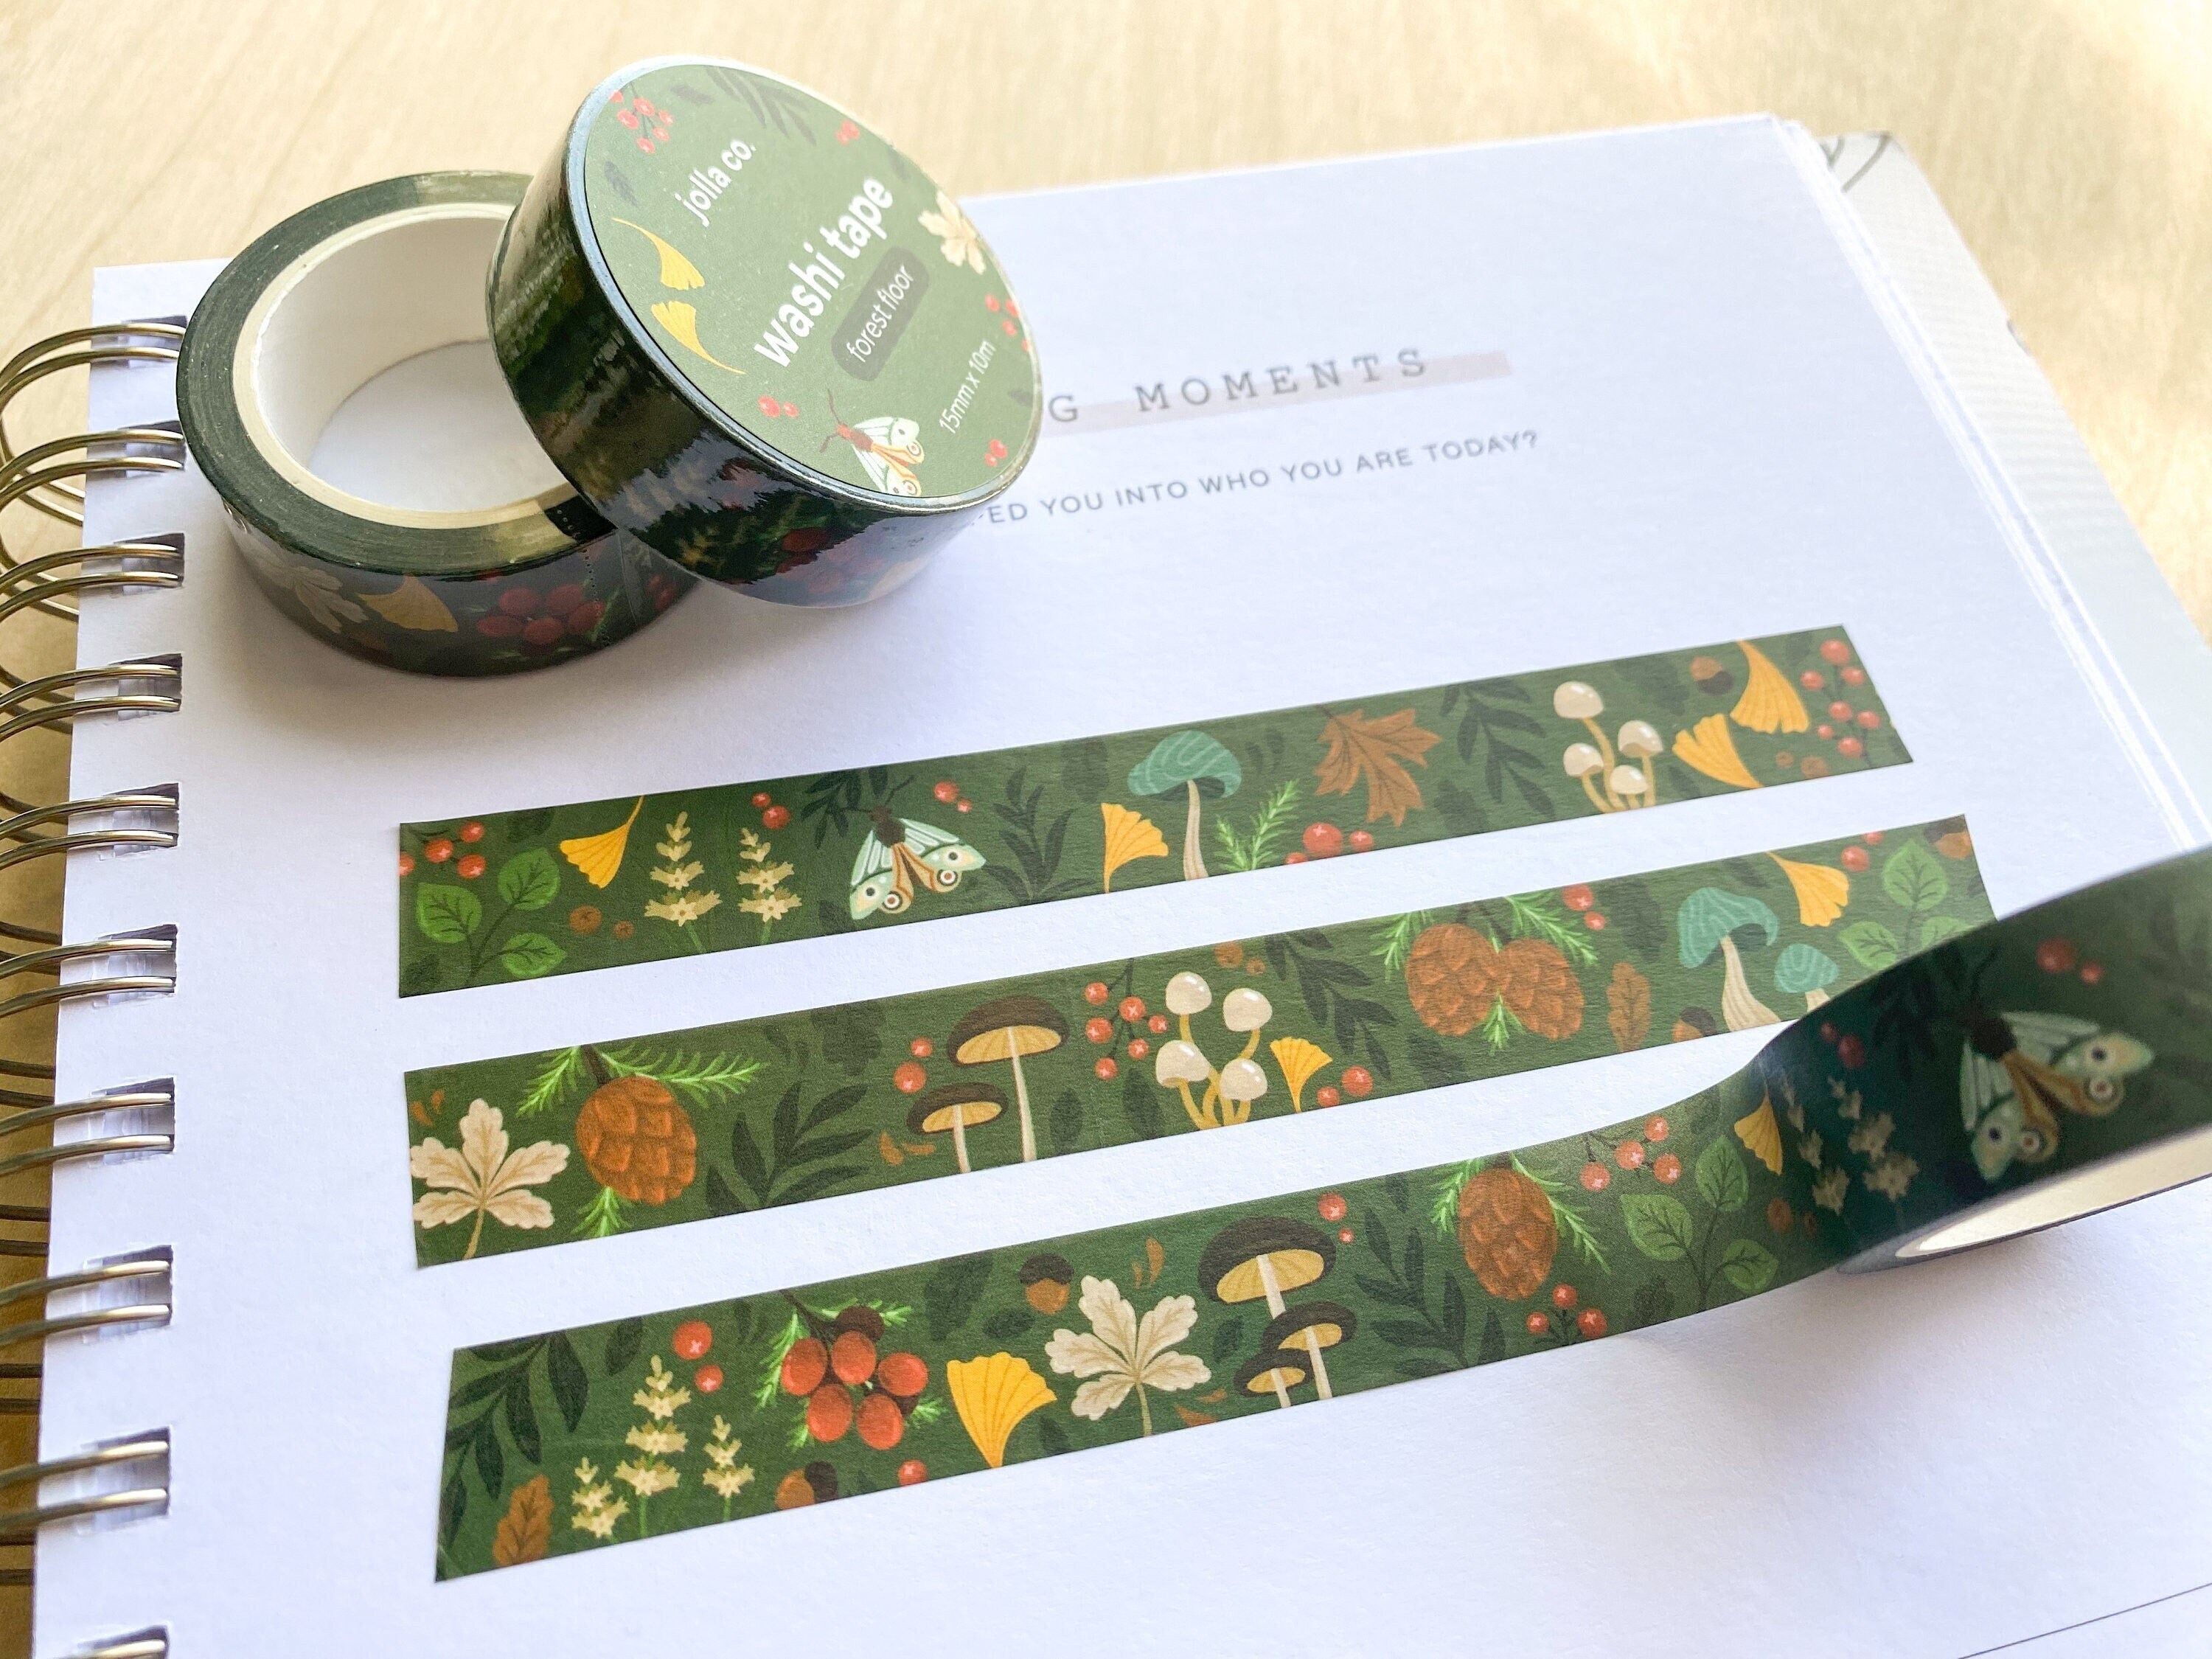 Set of 12 Washi Tape, Set of 8 Washi Tape, Travel Themed, Van Gogh Washi  Tape, Junk Journal, Scrapbook, Planner, Mixed Media Projects 